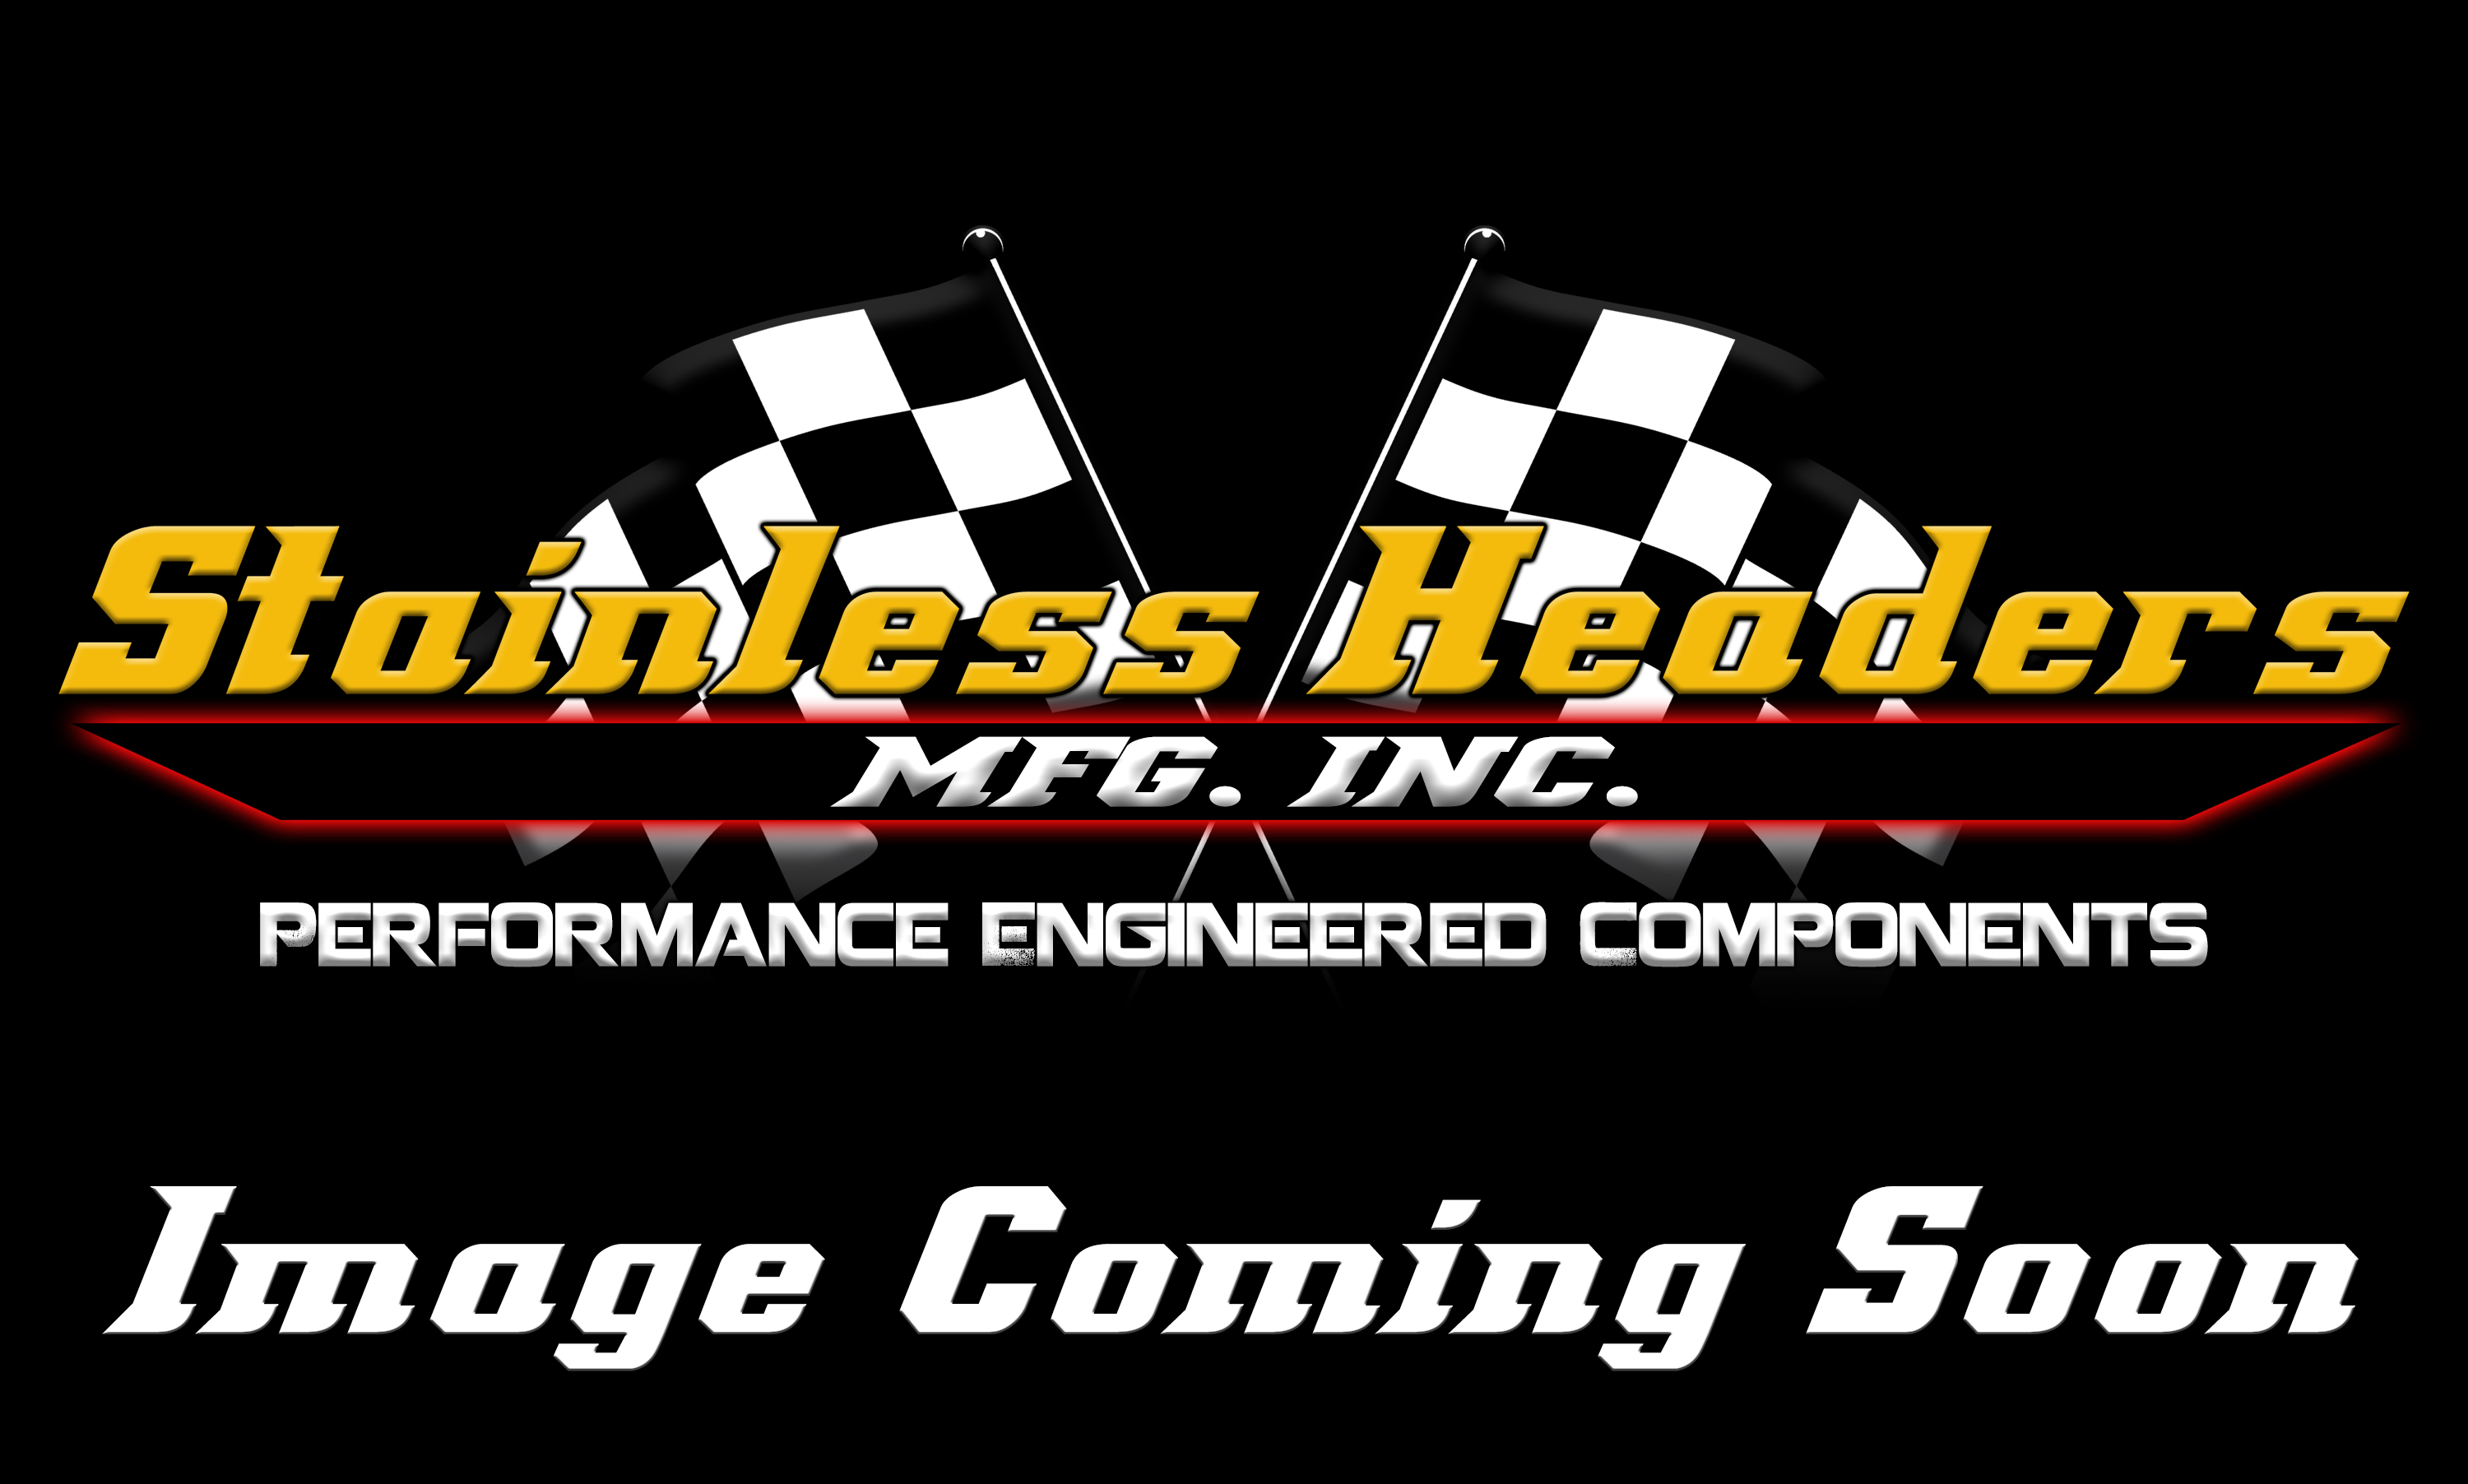 Merge Collectors - 321 Stainless Steel Merge Collectors - Stainless Headers - 1 1/2" Primary 3 into 1 Performance Merge Collector-16ga 321ss